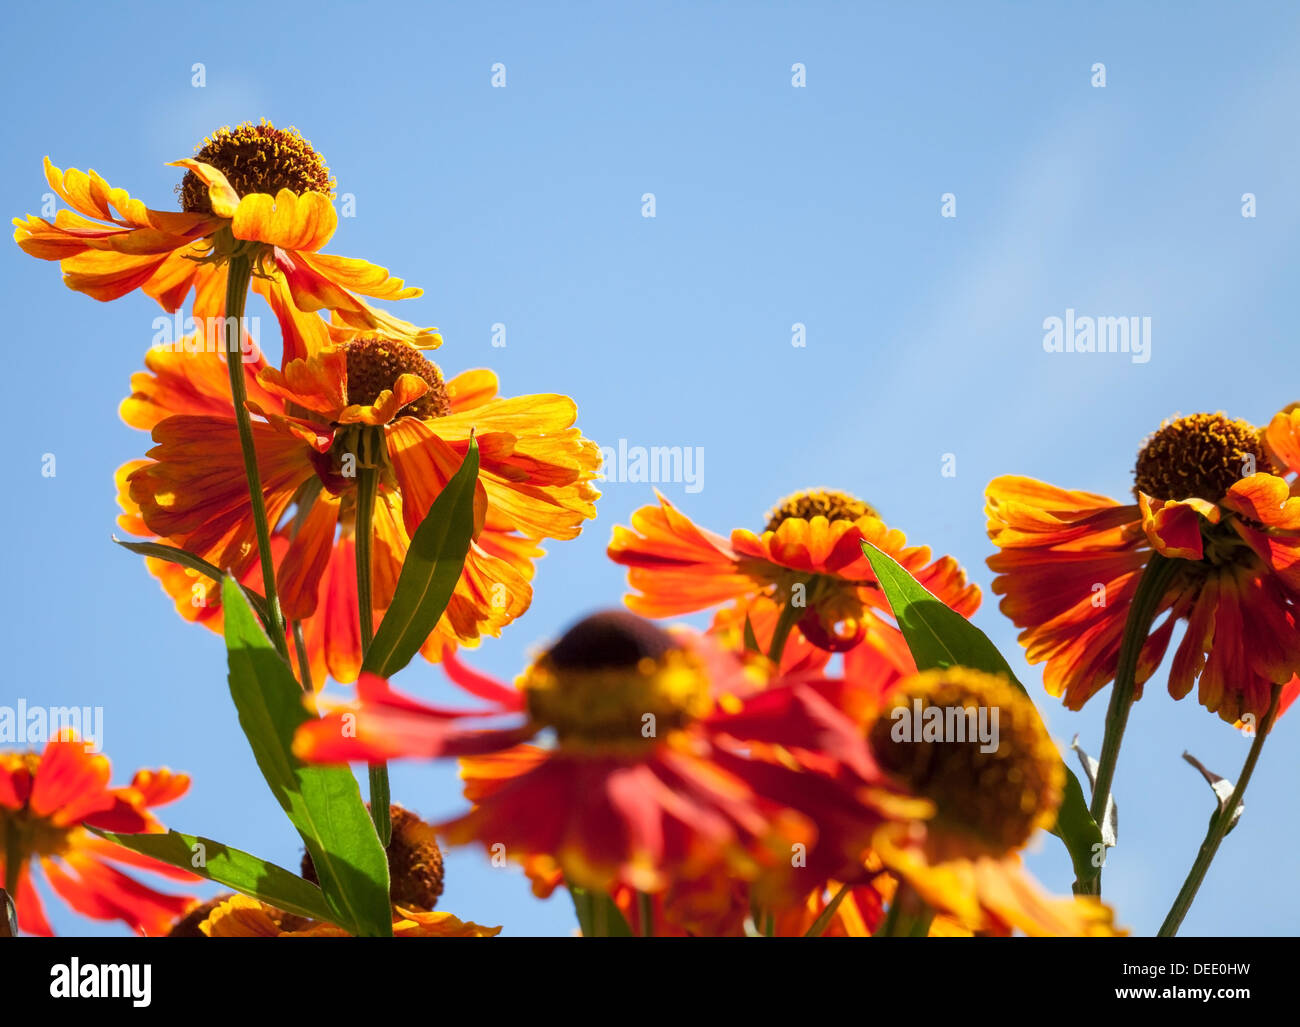 Bright red and orange Helenium flowers in the sunshine above blue sky Stock Photo